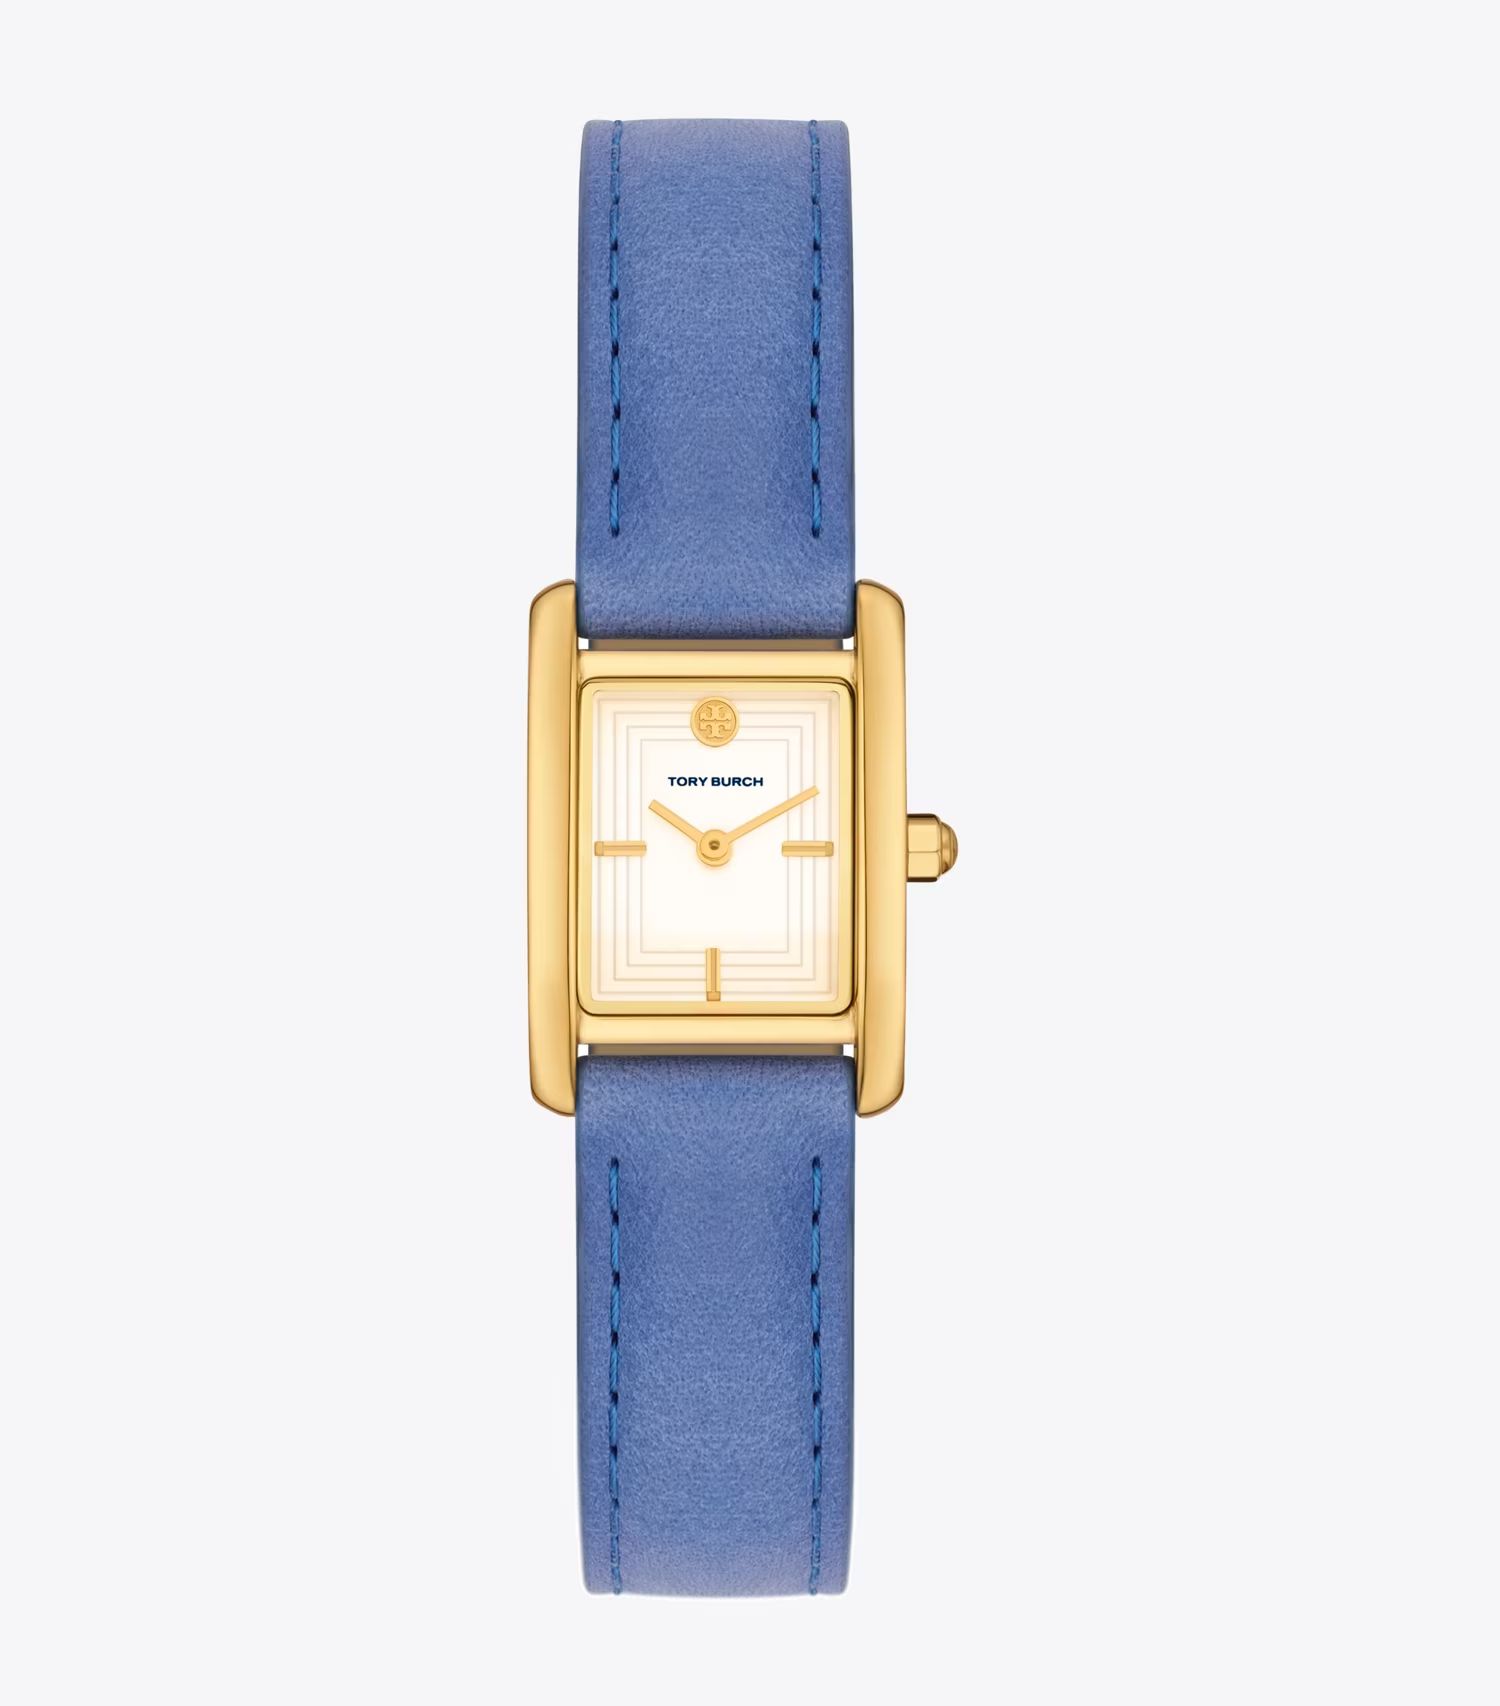 Mini Eleanor Watch, Leather/Gold-Tone Stainless Steel: Women's Designer Strap Watches | Tory Burc... | Tory Burch (US)